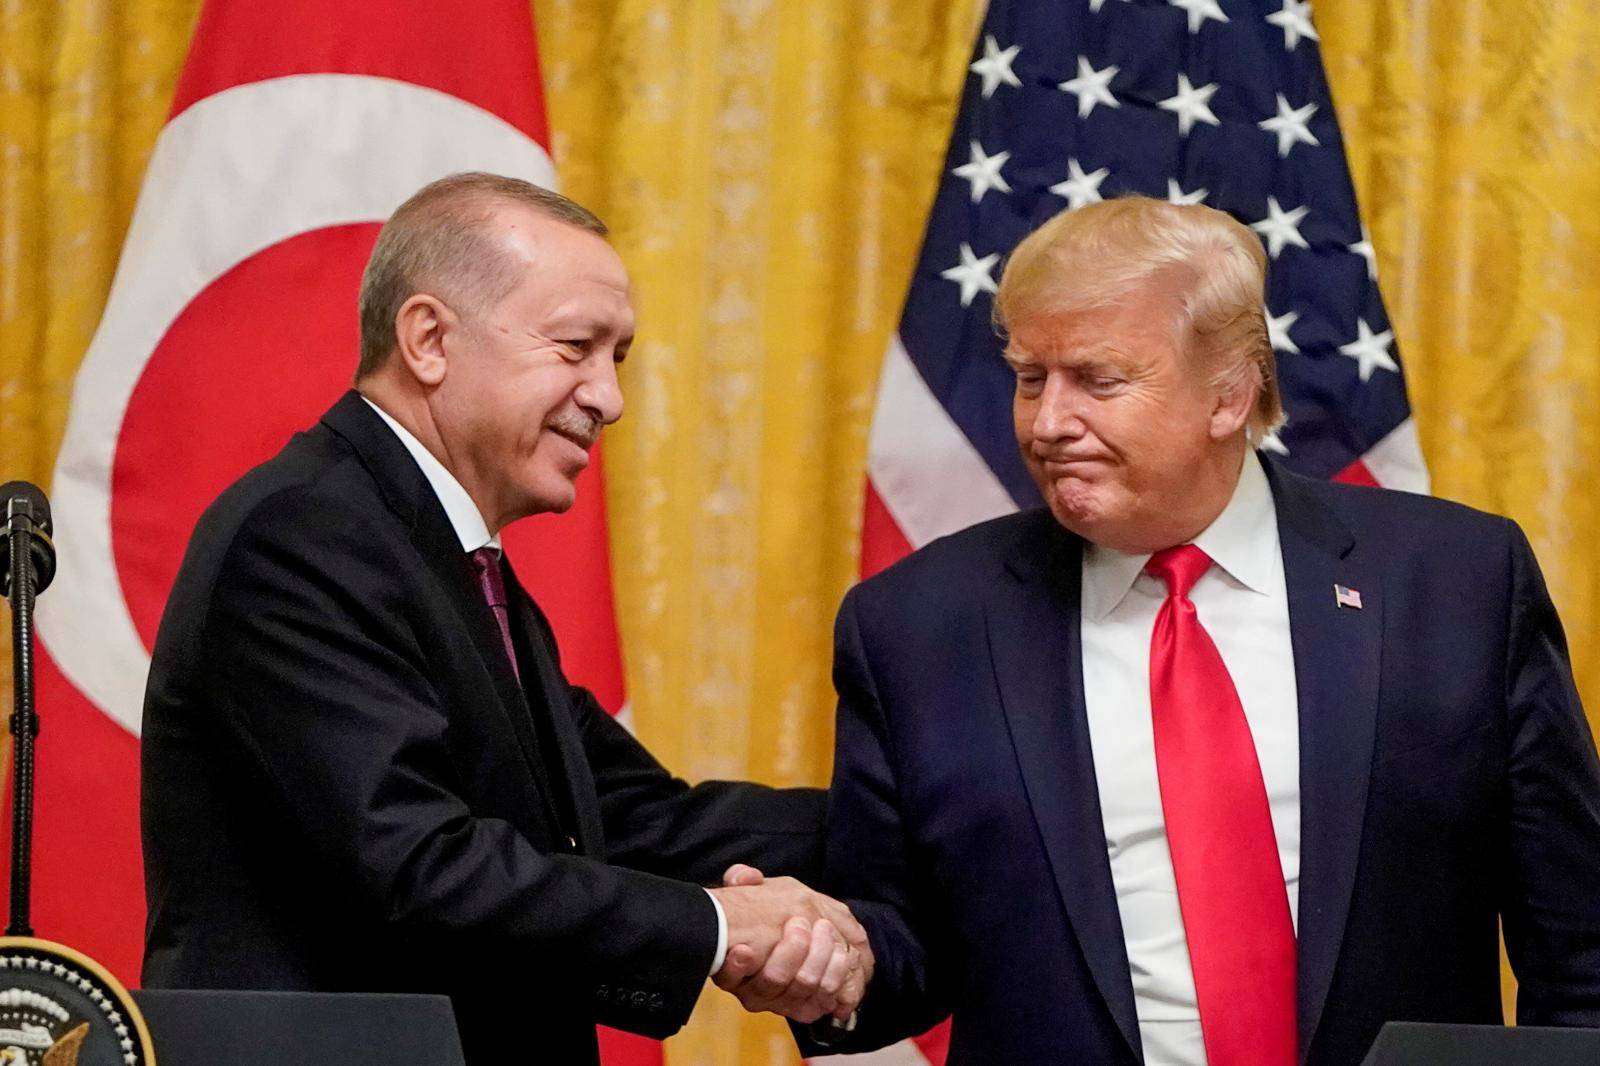 FILE PHOTO: U.S. President Donald Trump and Turkey's President Tayyip Erdogan hold a joint news conference at the White House in Washington